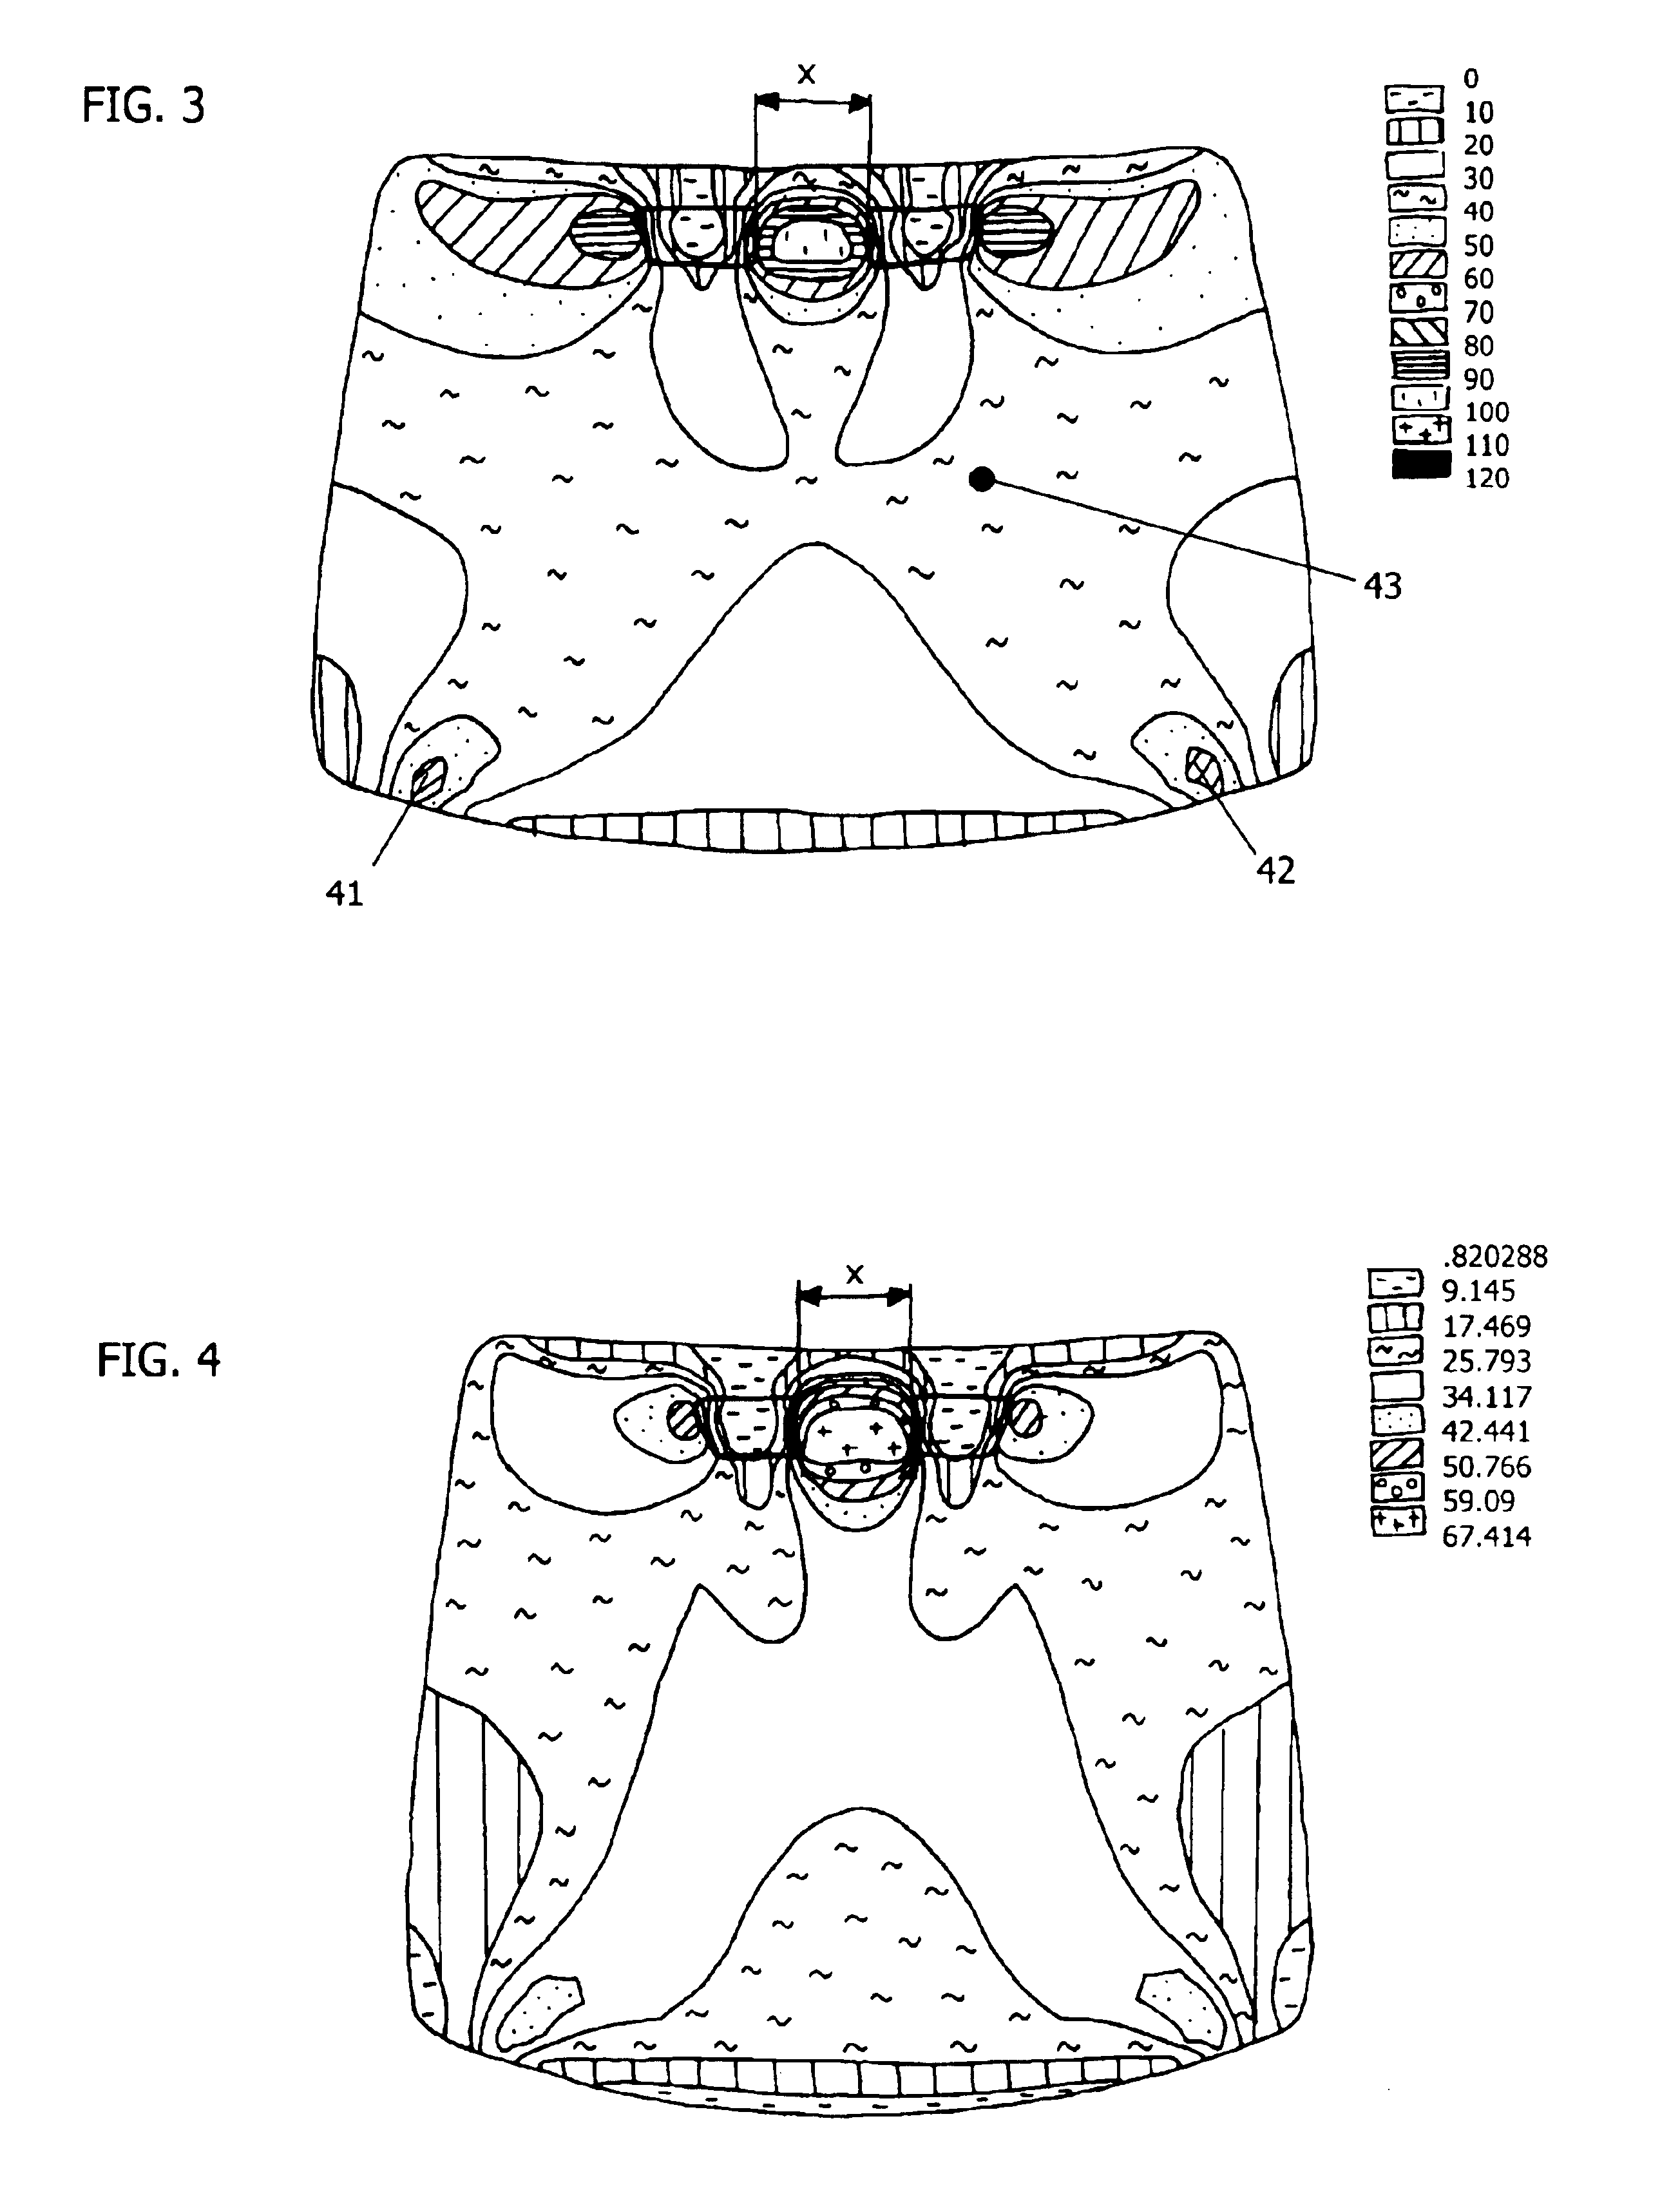 Automotive glazing panel having an electrically heatable solar control coating layer provided with data transmission windows